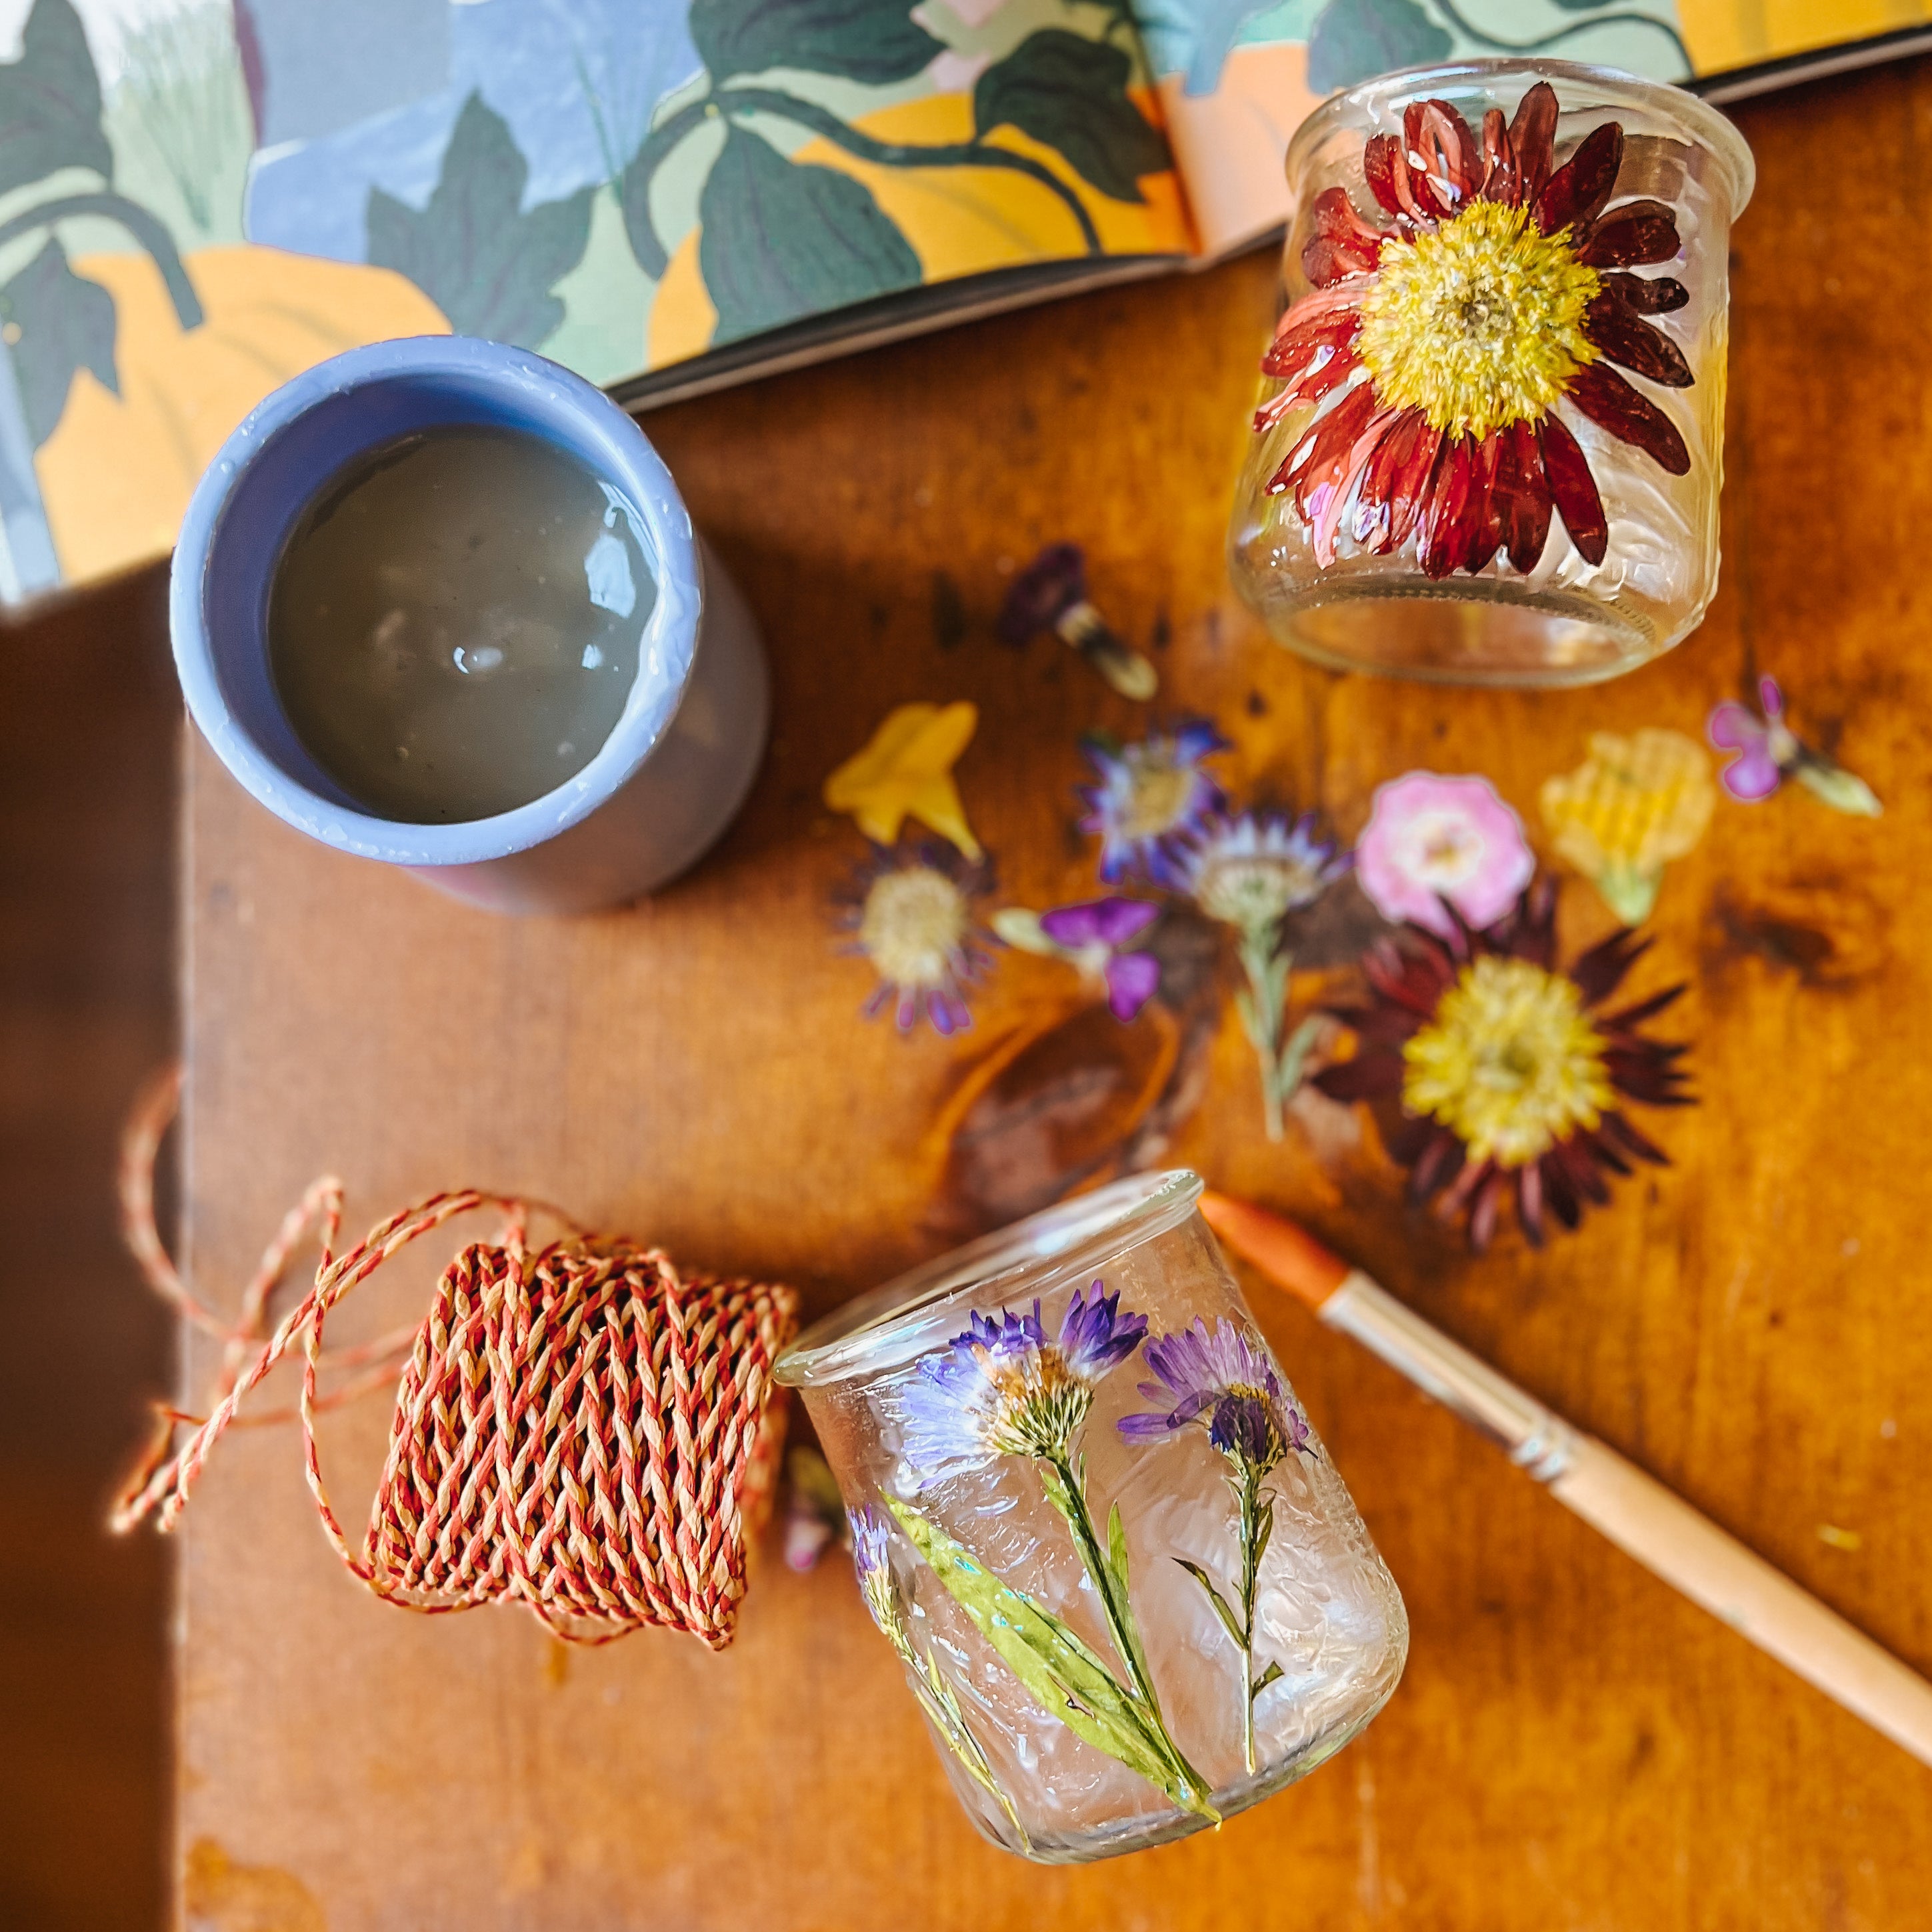 Glass jars sit on a table with pressed flowers.